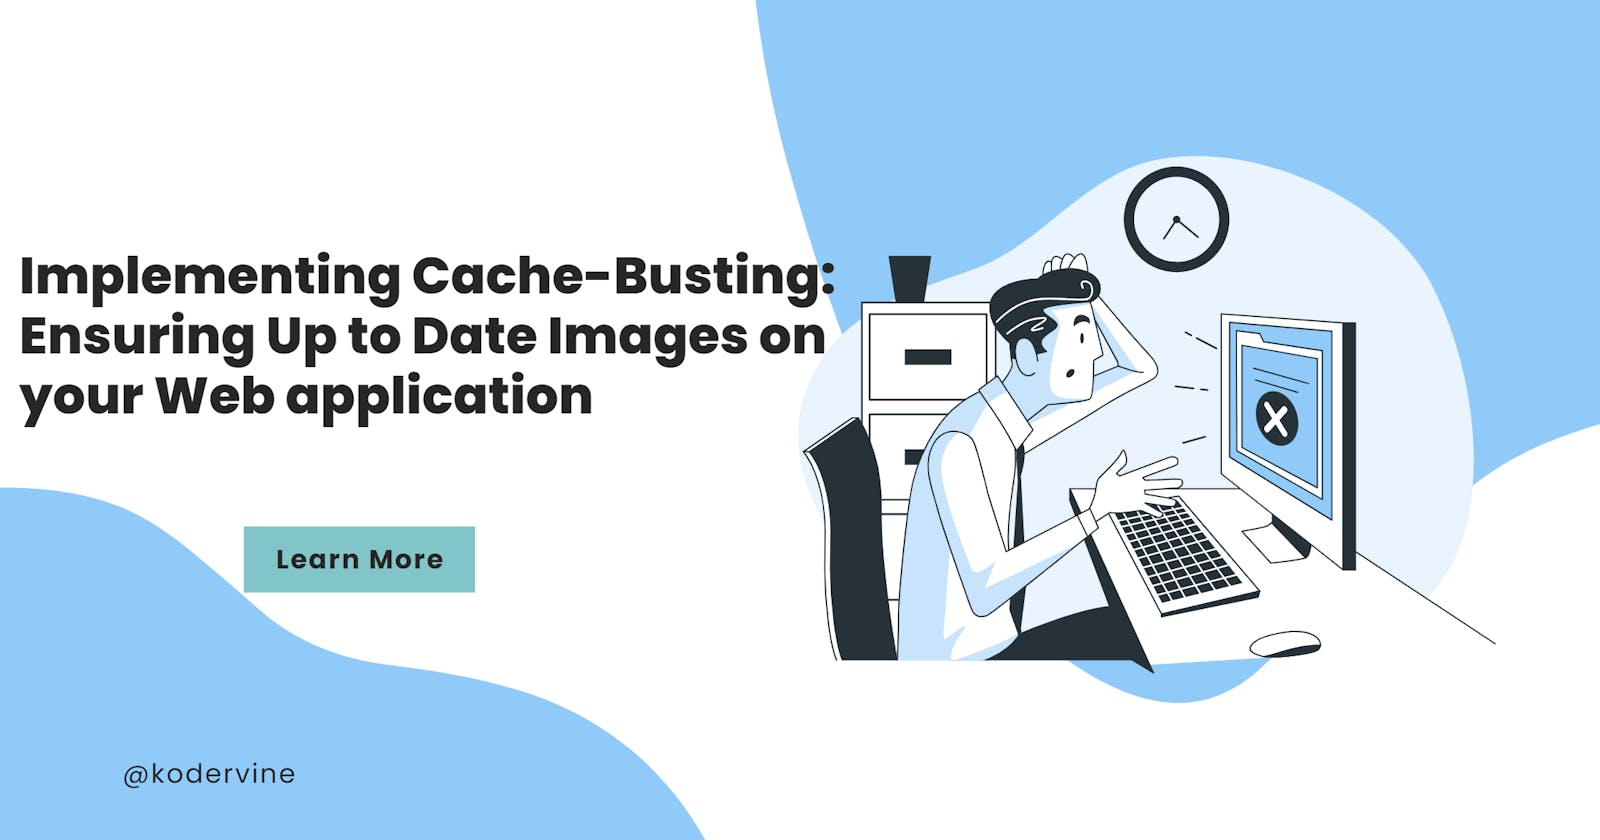 Implementing Cache-Busting: Ensuring Up to Date Images on your Web application